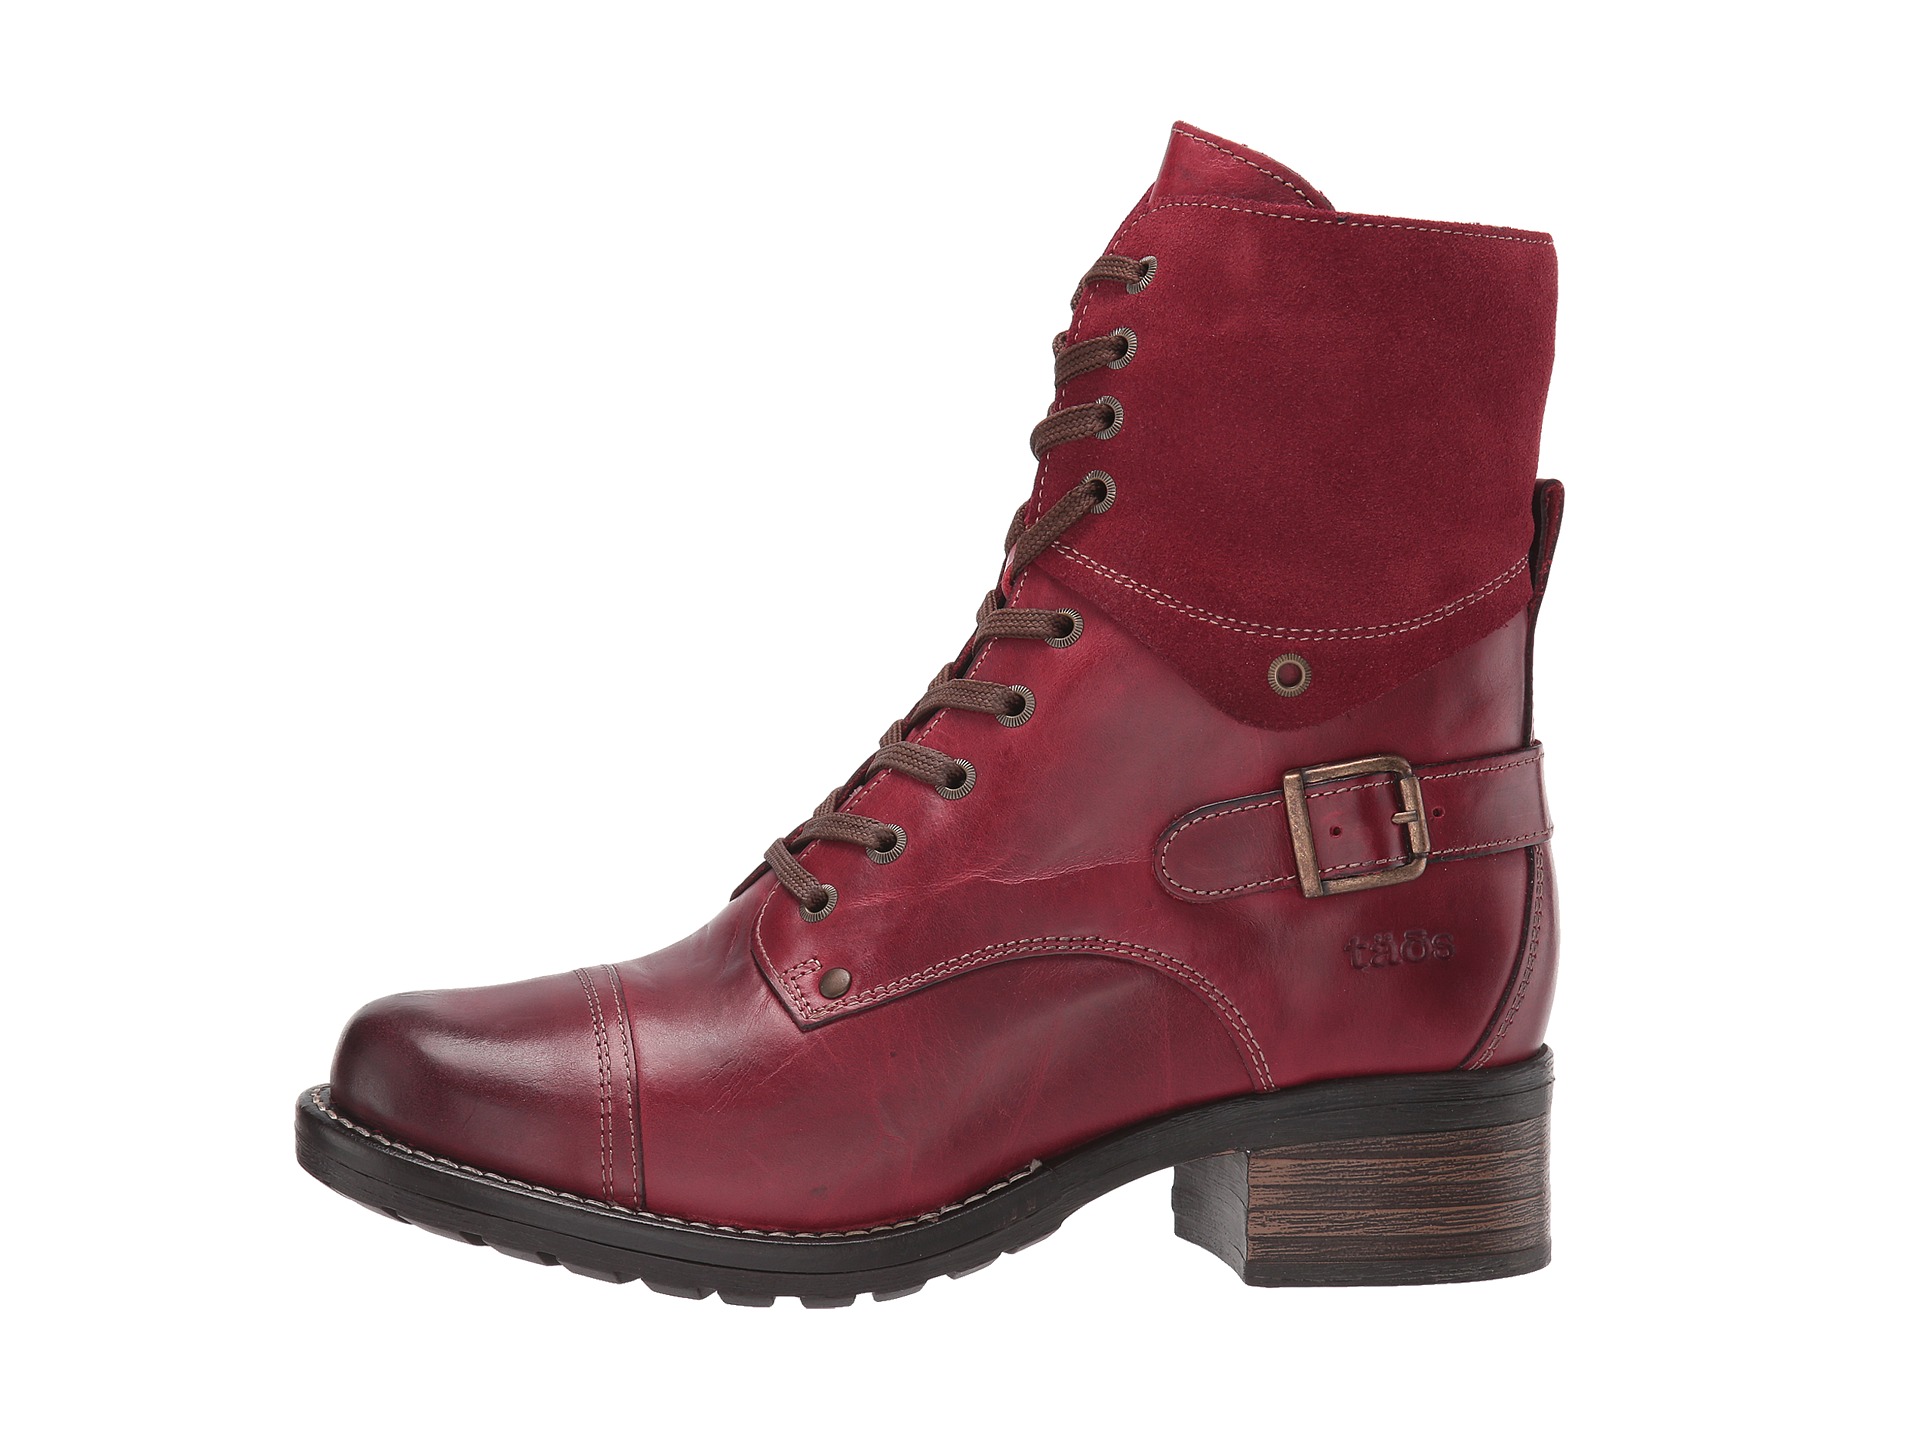 Taos Footwear Crave Red - Zappos.com Free Shipping BOTH Ways